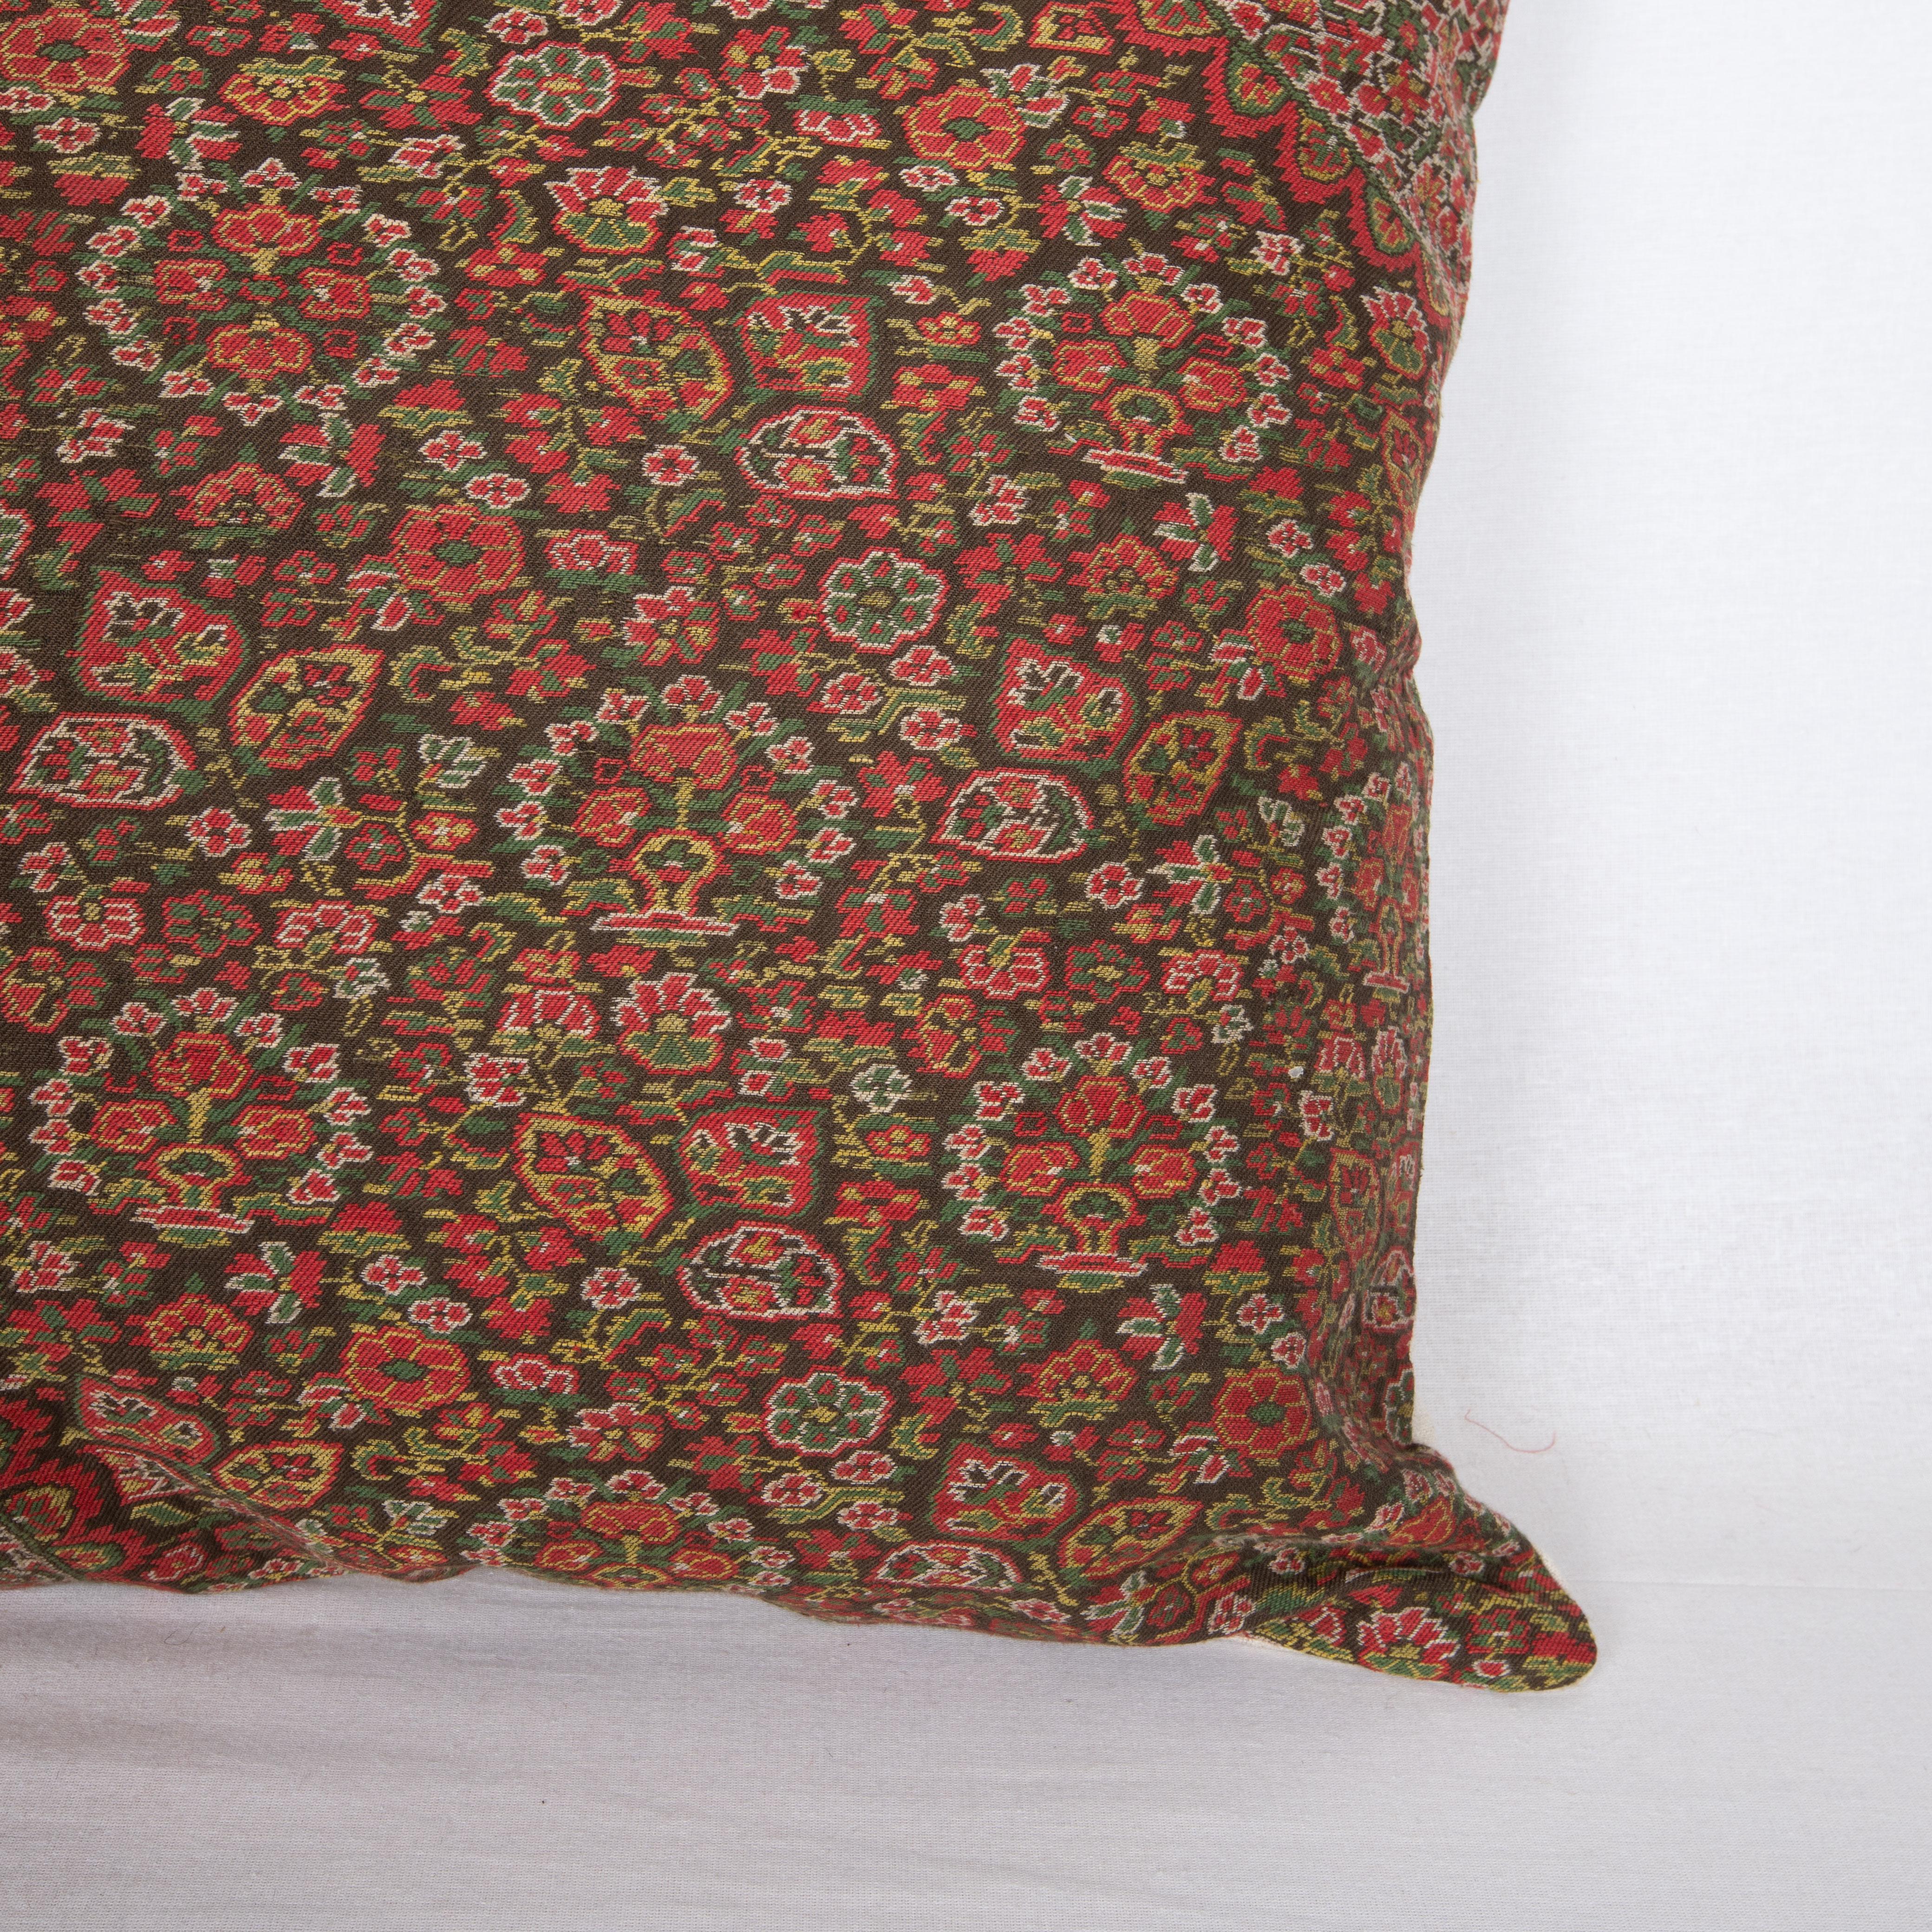 Woven Antique Pillow Cover Made from a European Wool Paisley Shawl, L 19th/ E.20th C. For Sale